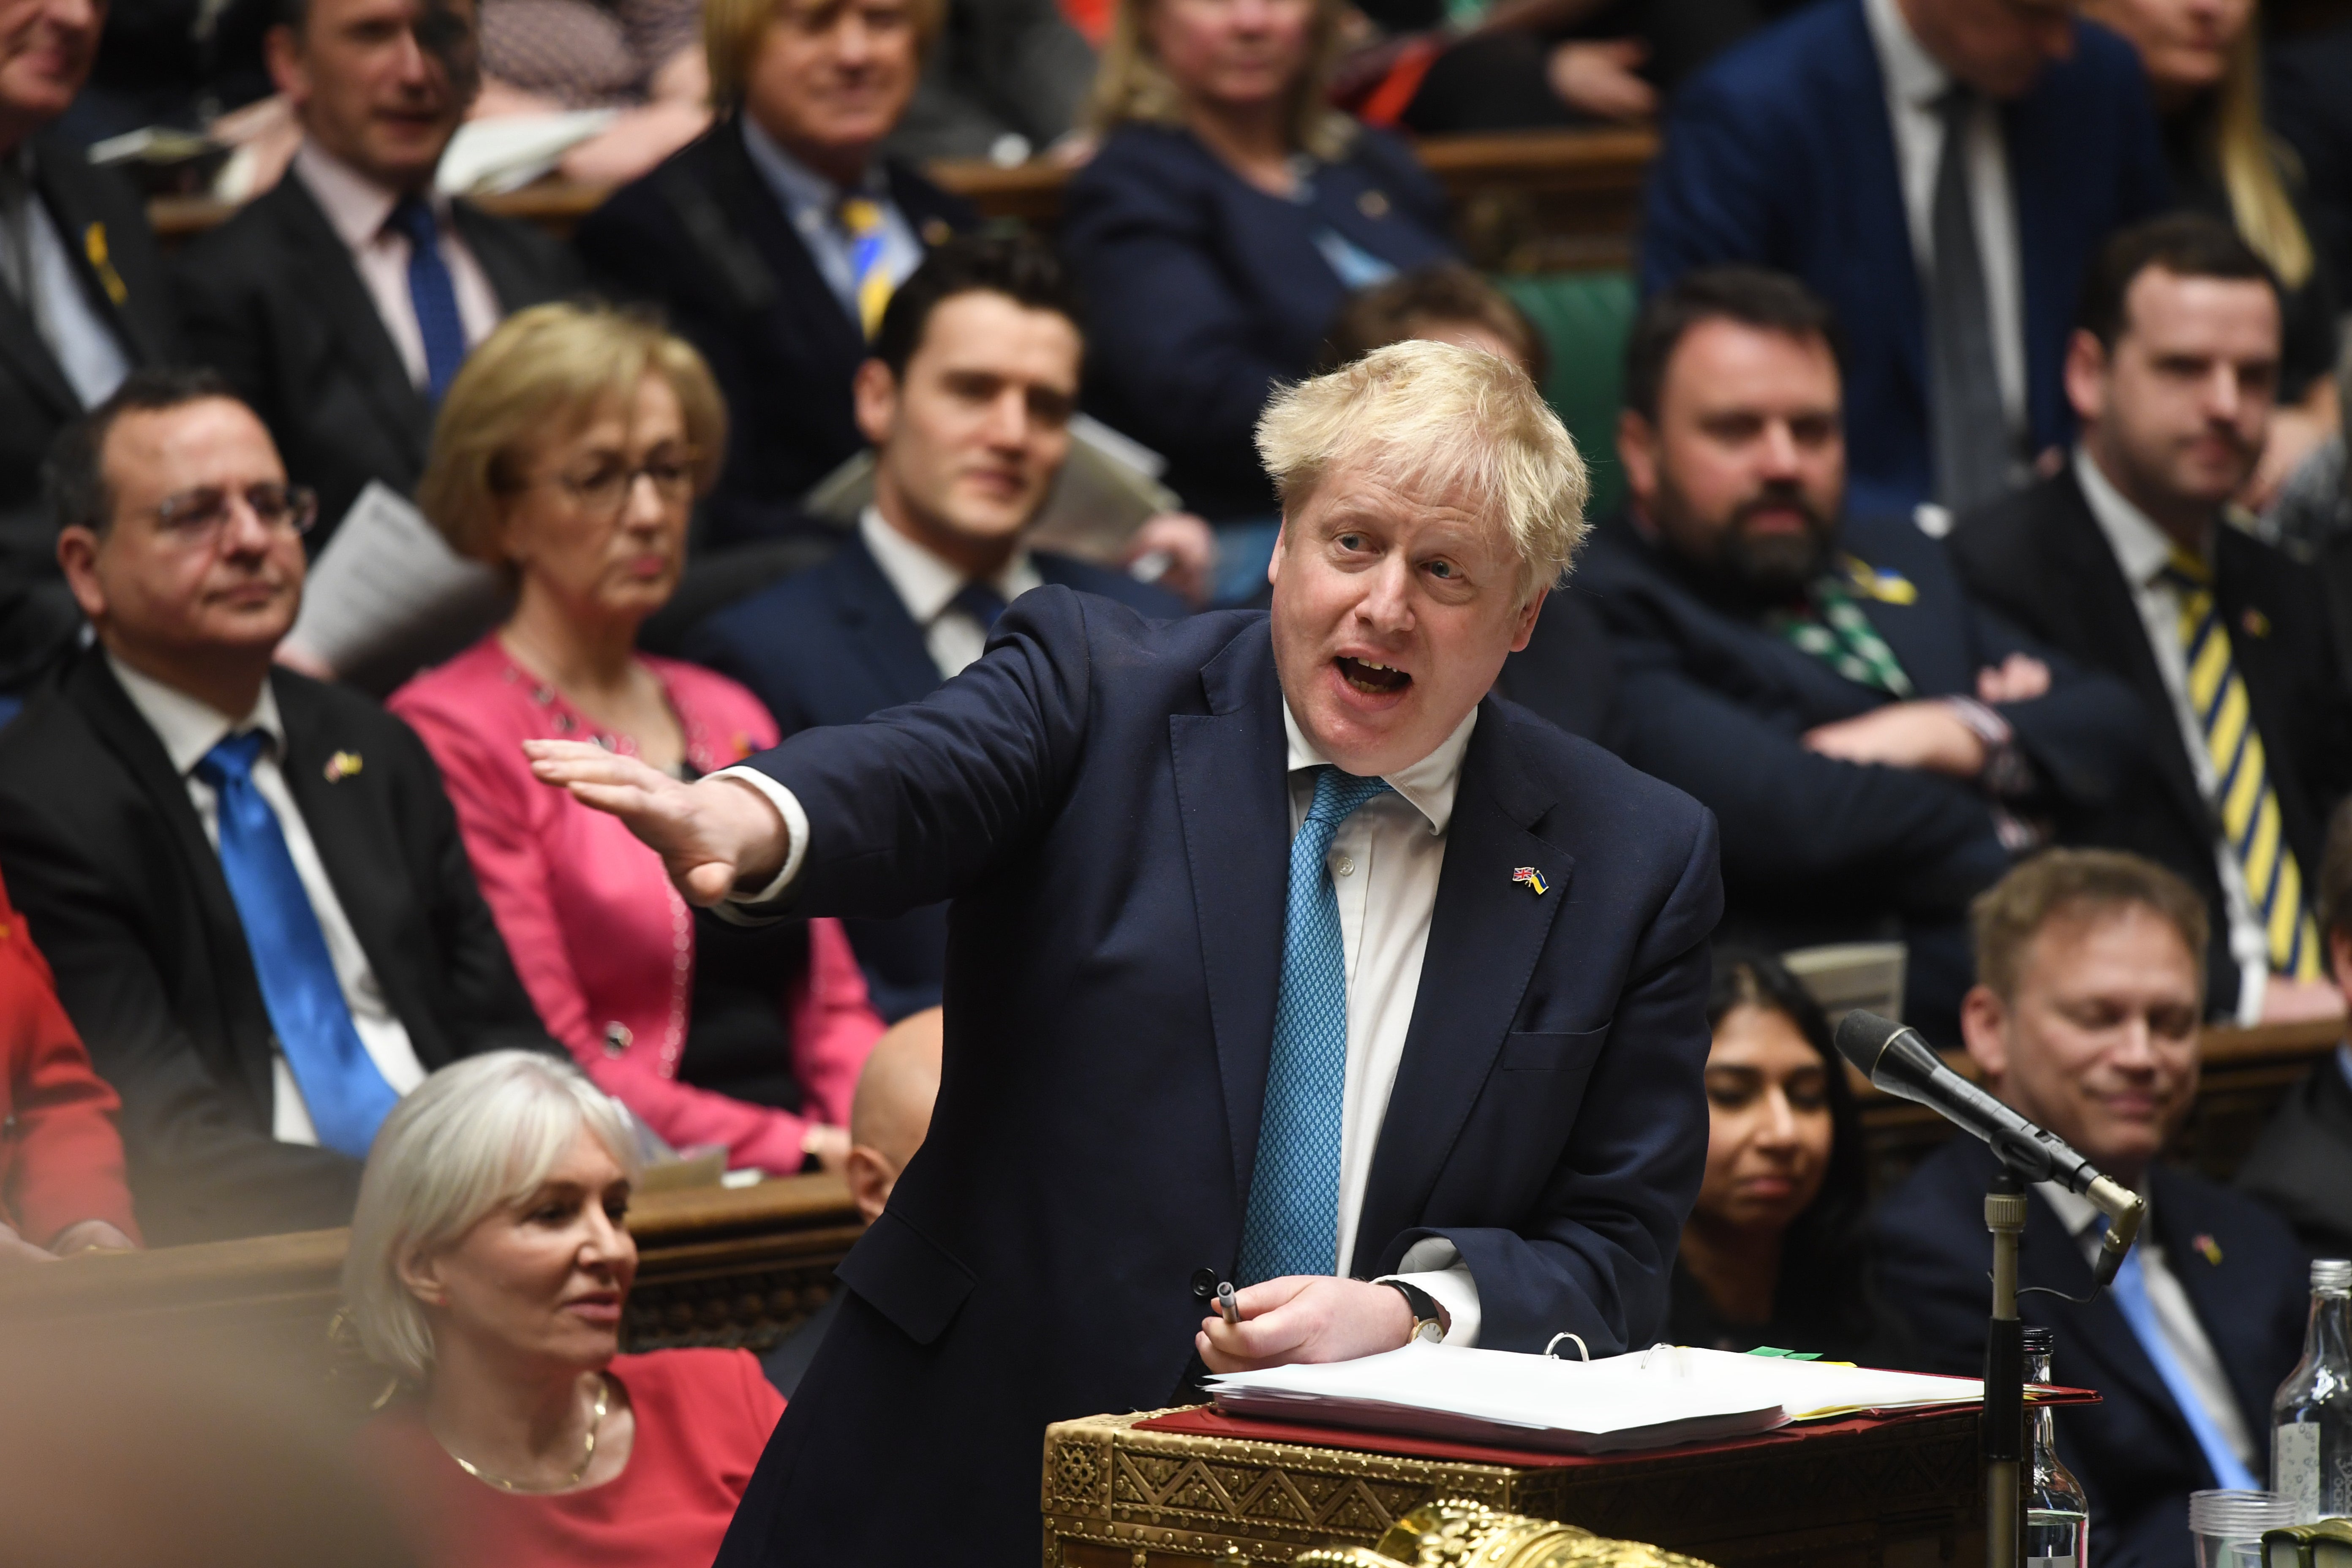 Boris Johnson will receive the same pay rise as other MPs in the Commons (UK Parliament/Jessica Taylor/PA)